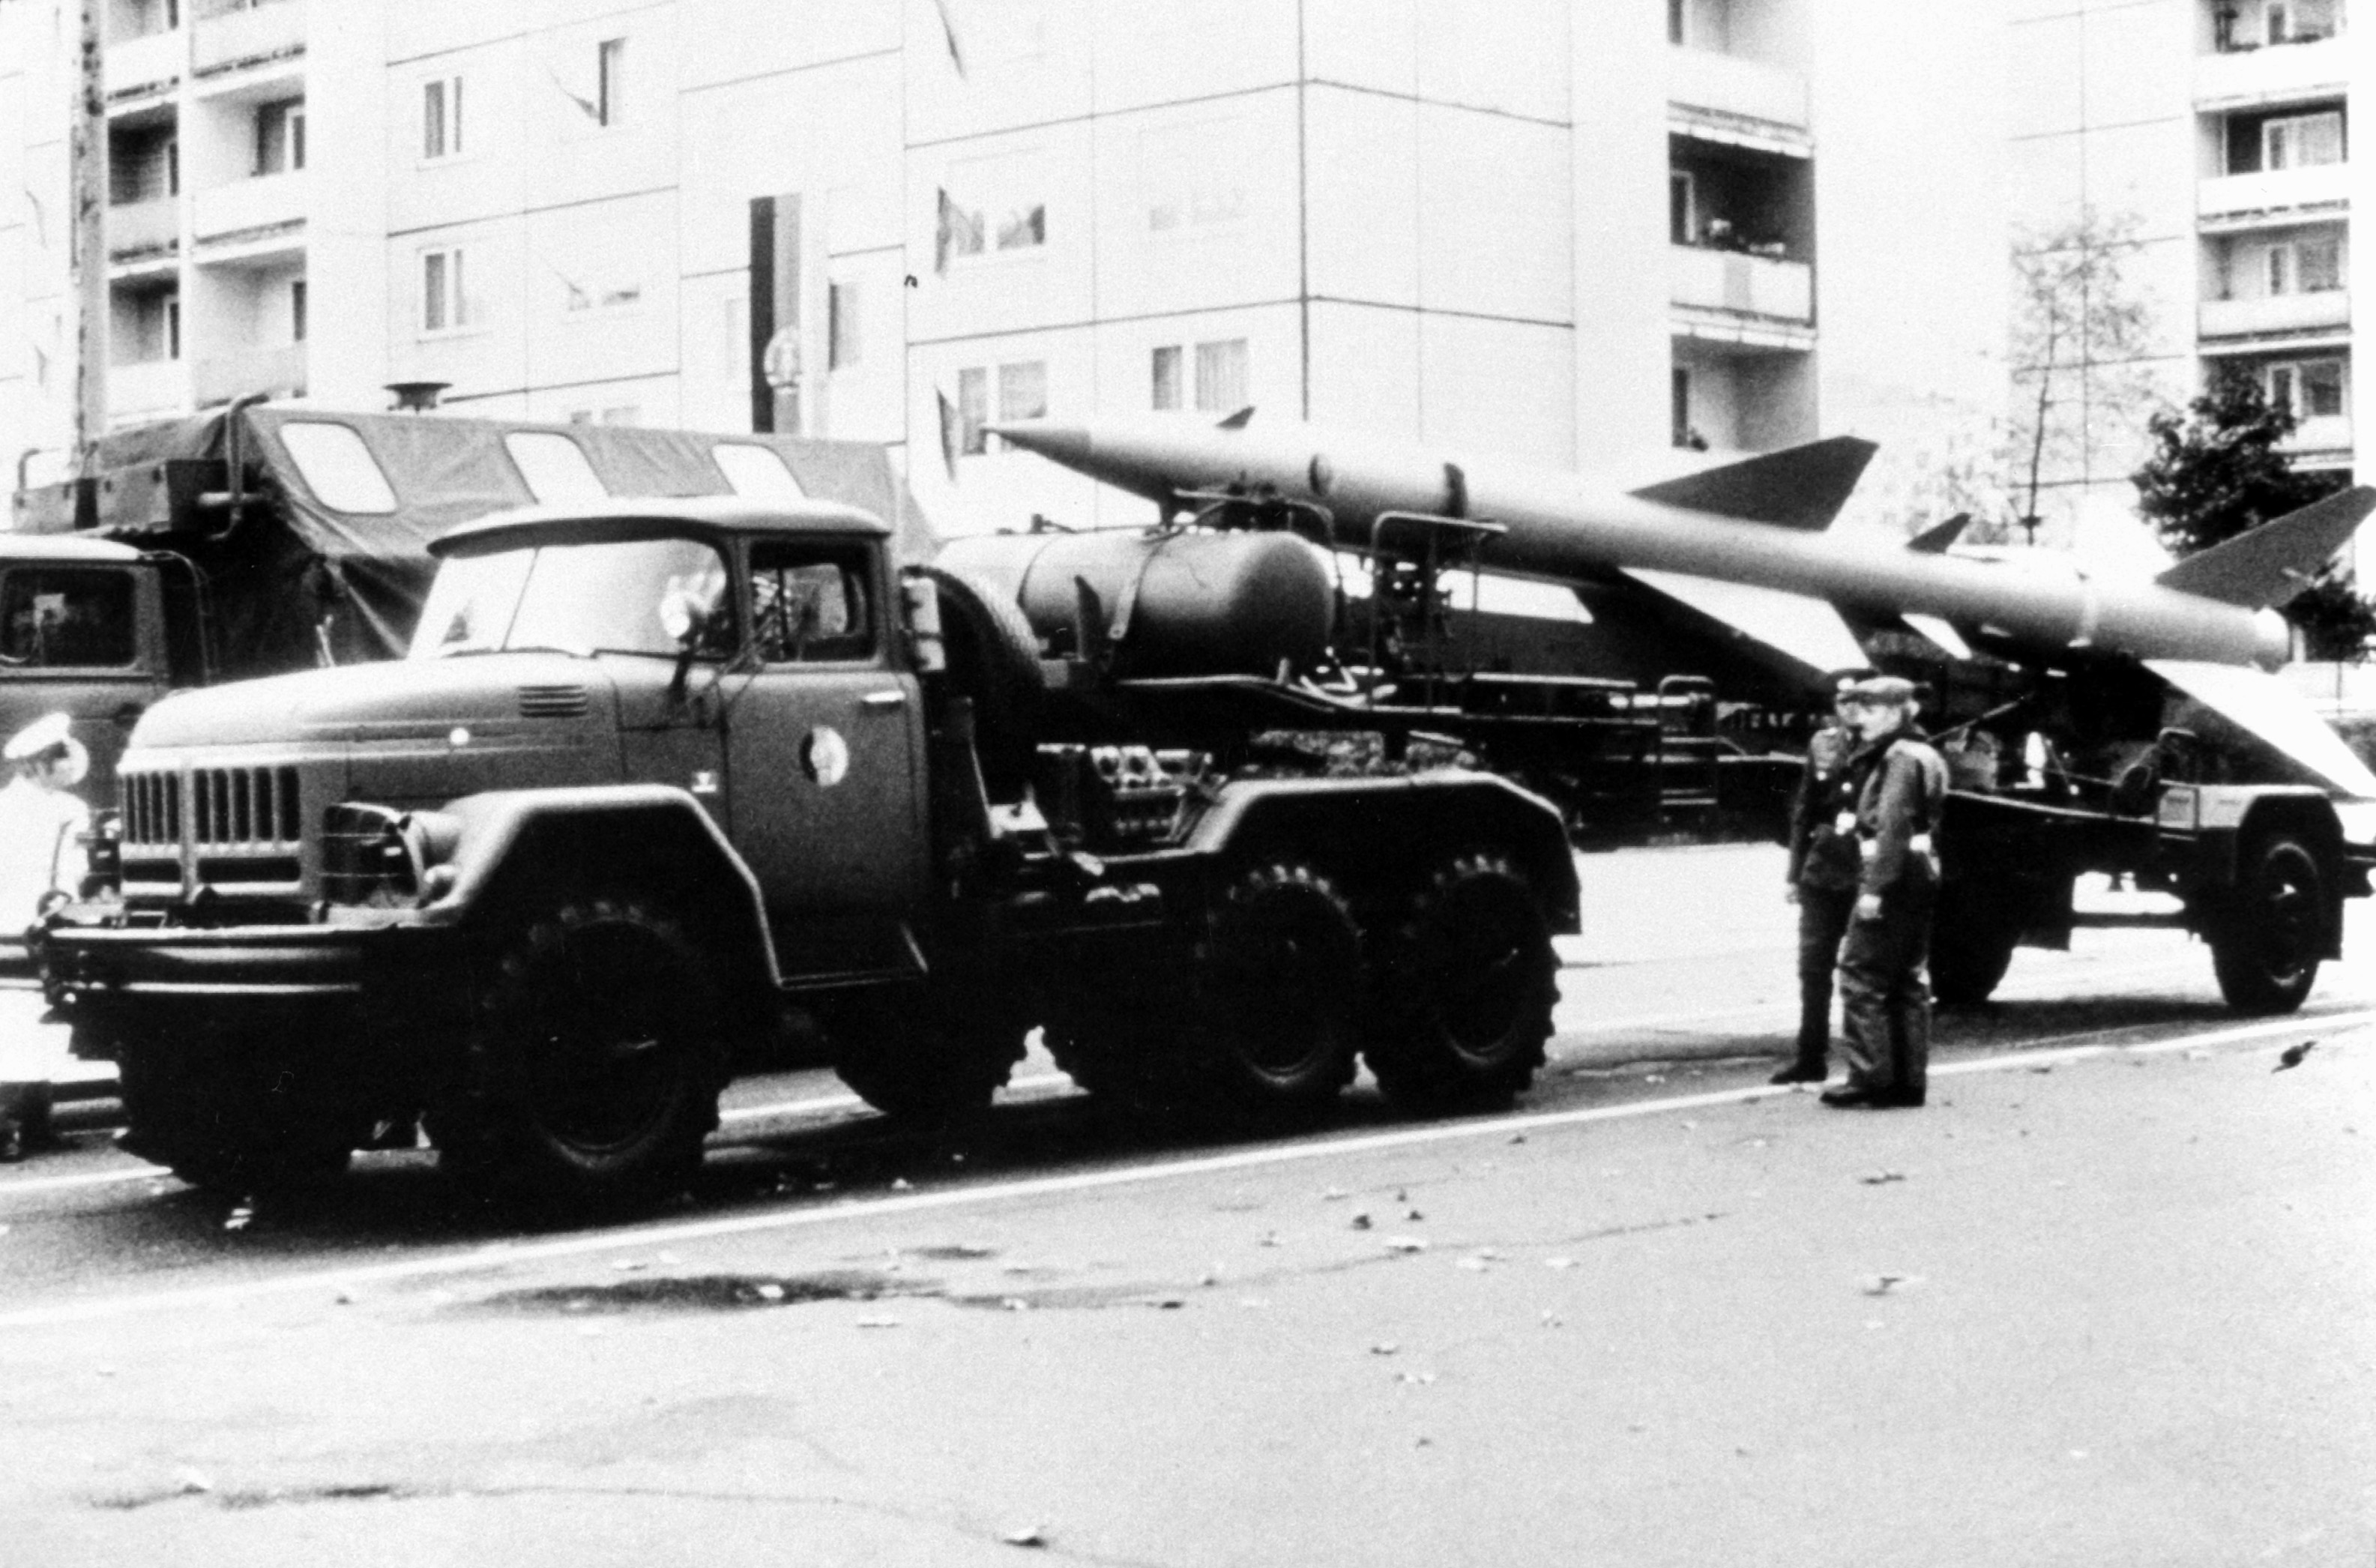 File:SA-2 Guideline towed by a ZIL-131 truck.JPEG - Wikimedia Commons